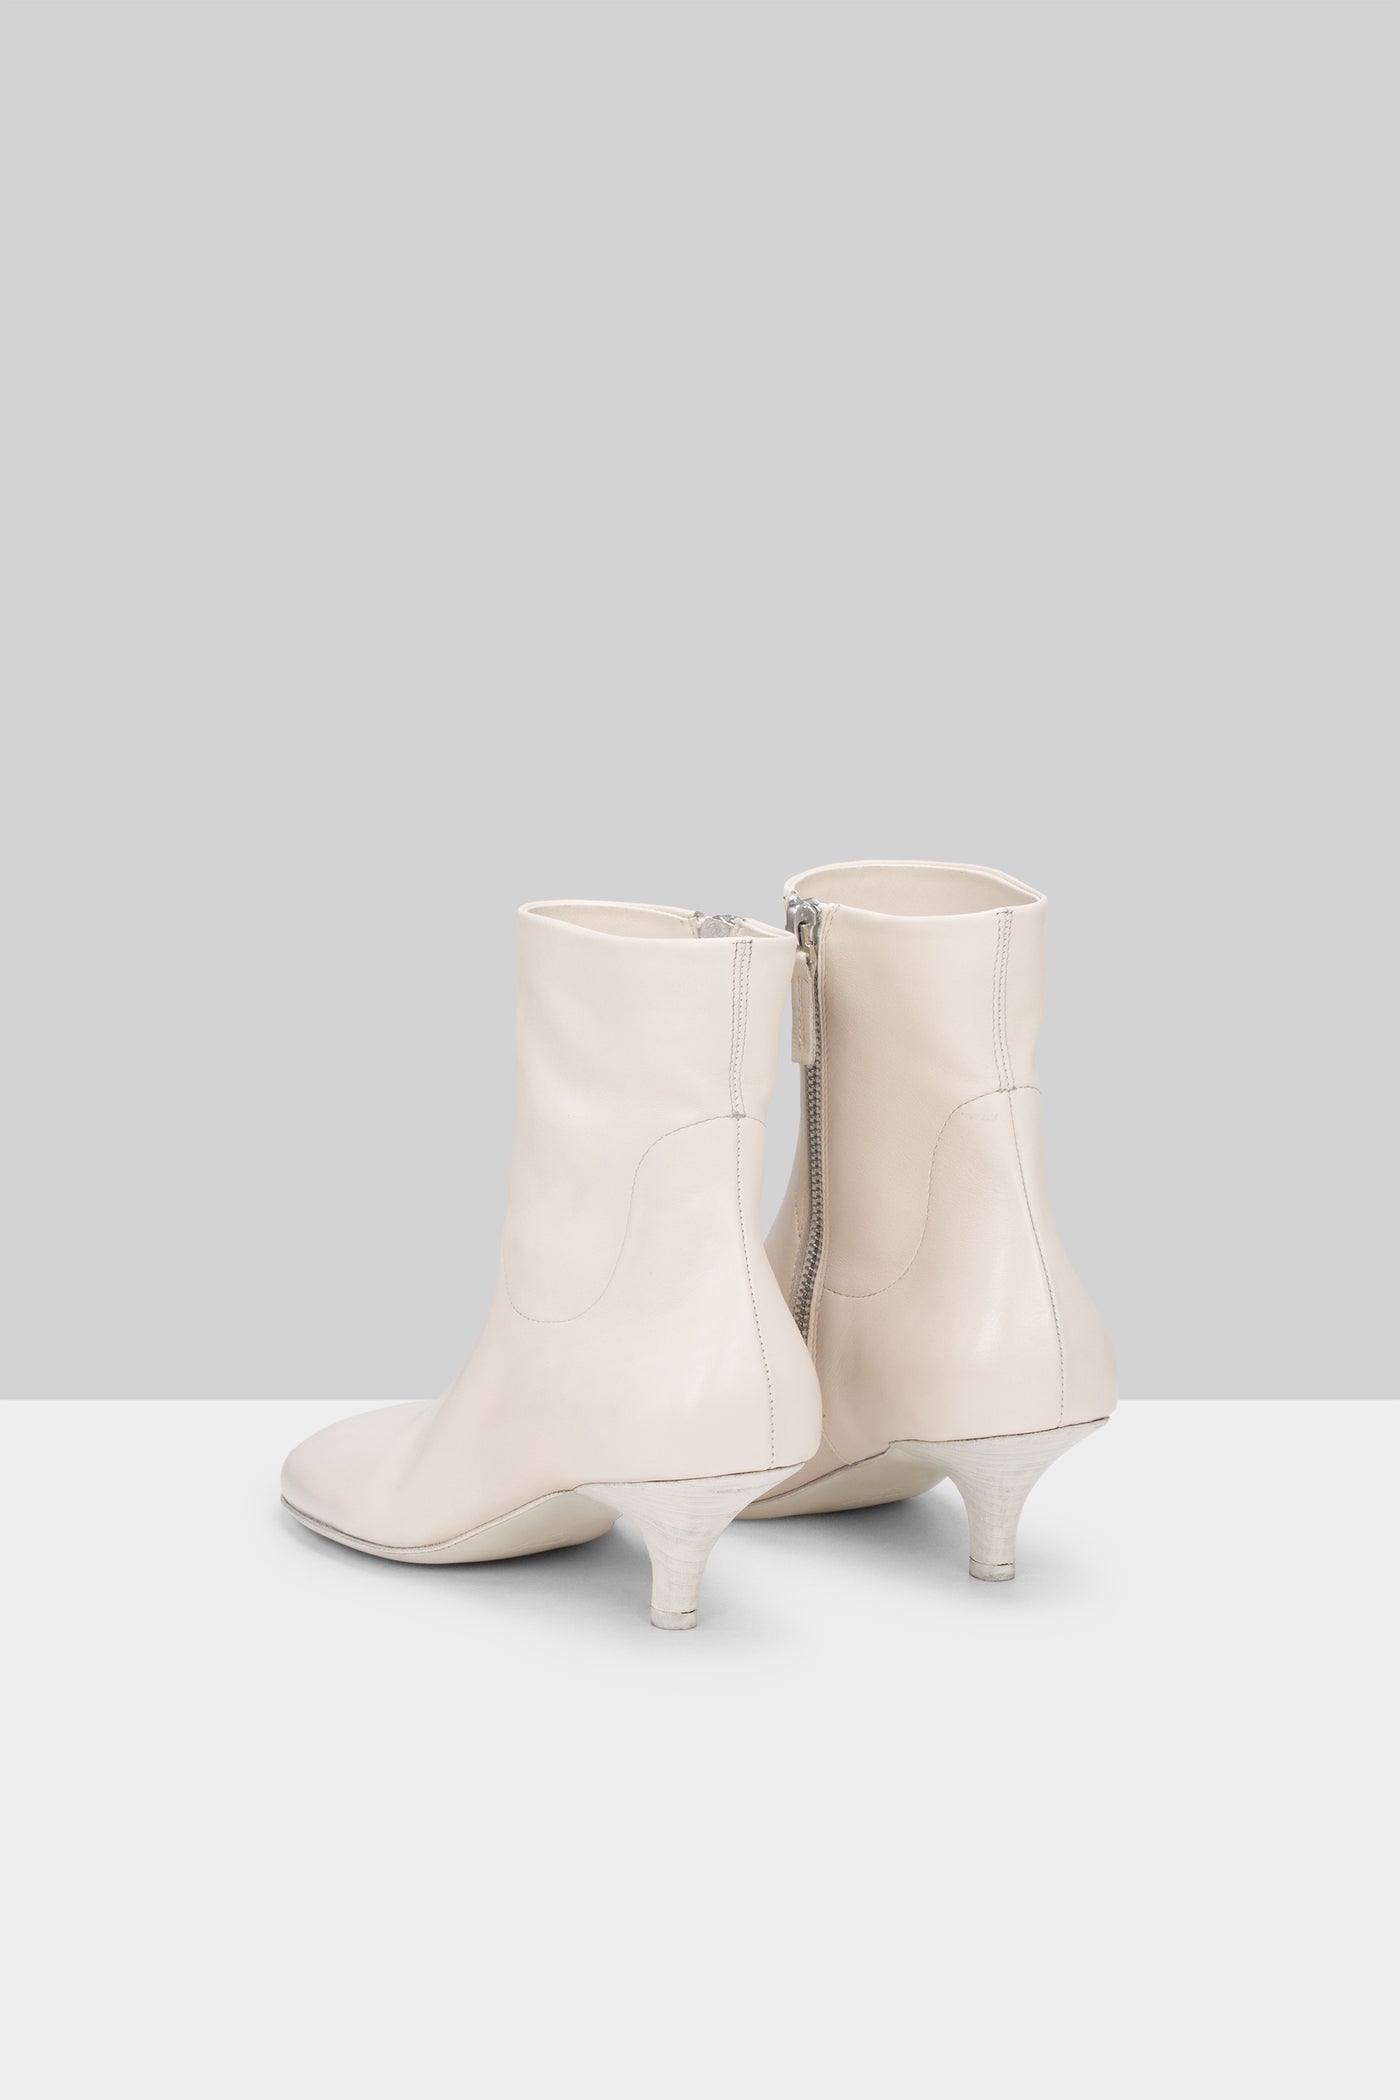 Marsell-Spilla-Ankle-Boot-Amarees-2